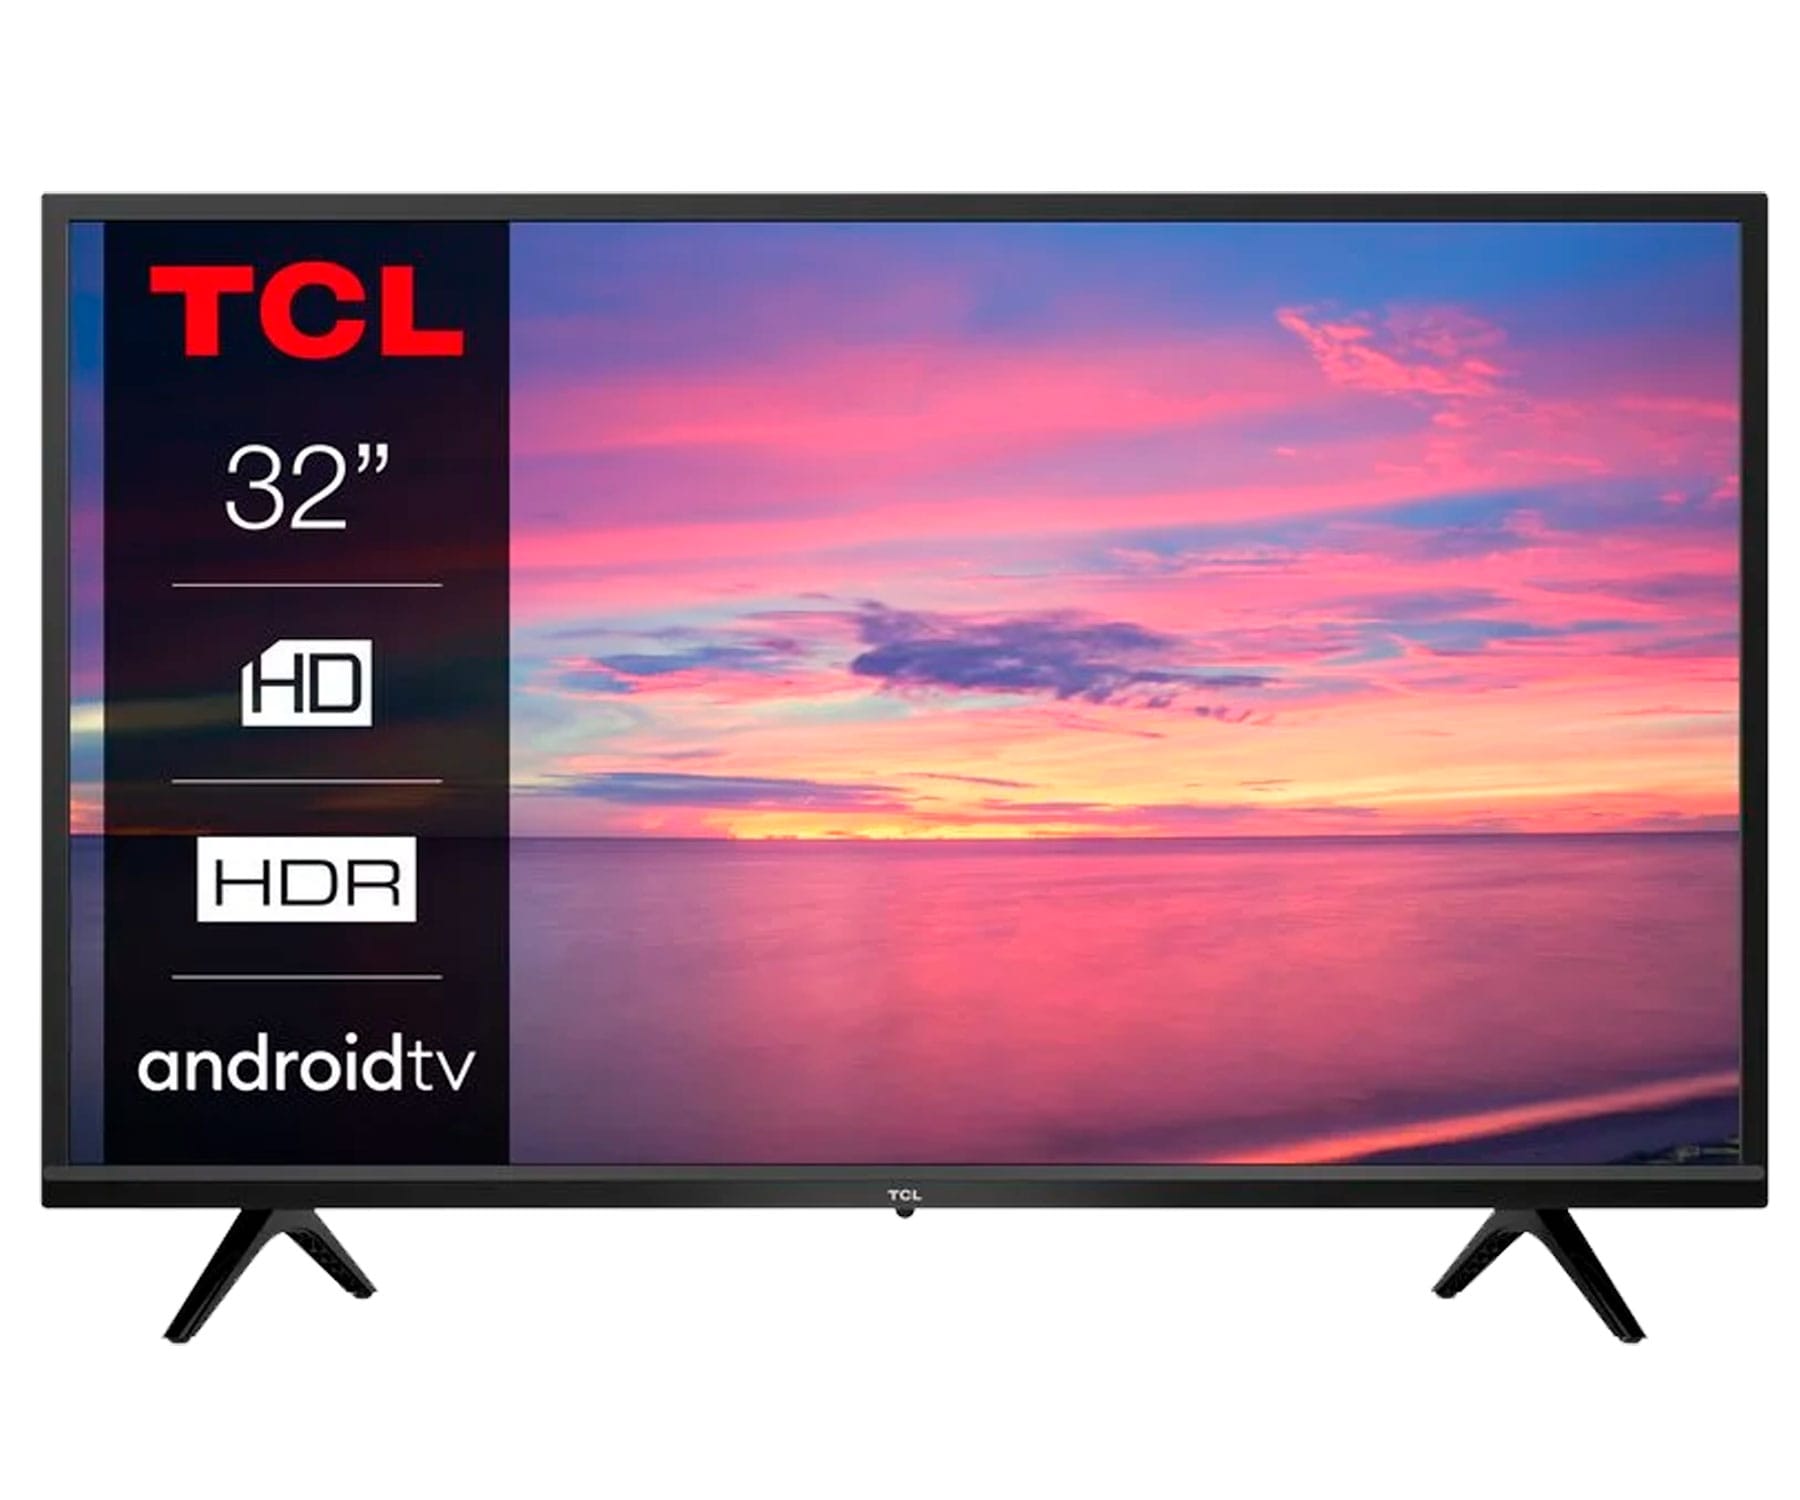 TCL - TCL 32S5200 Televisor Android TV 32" HD HDR